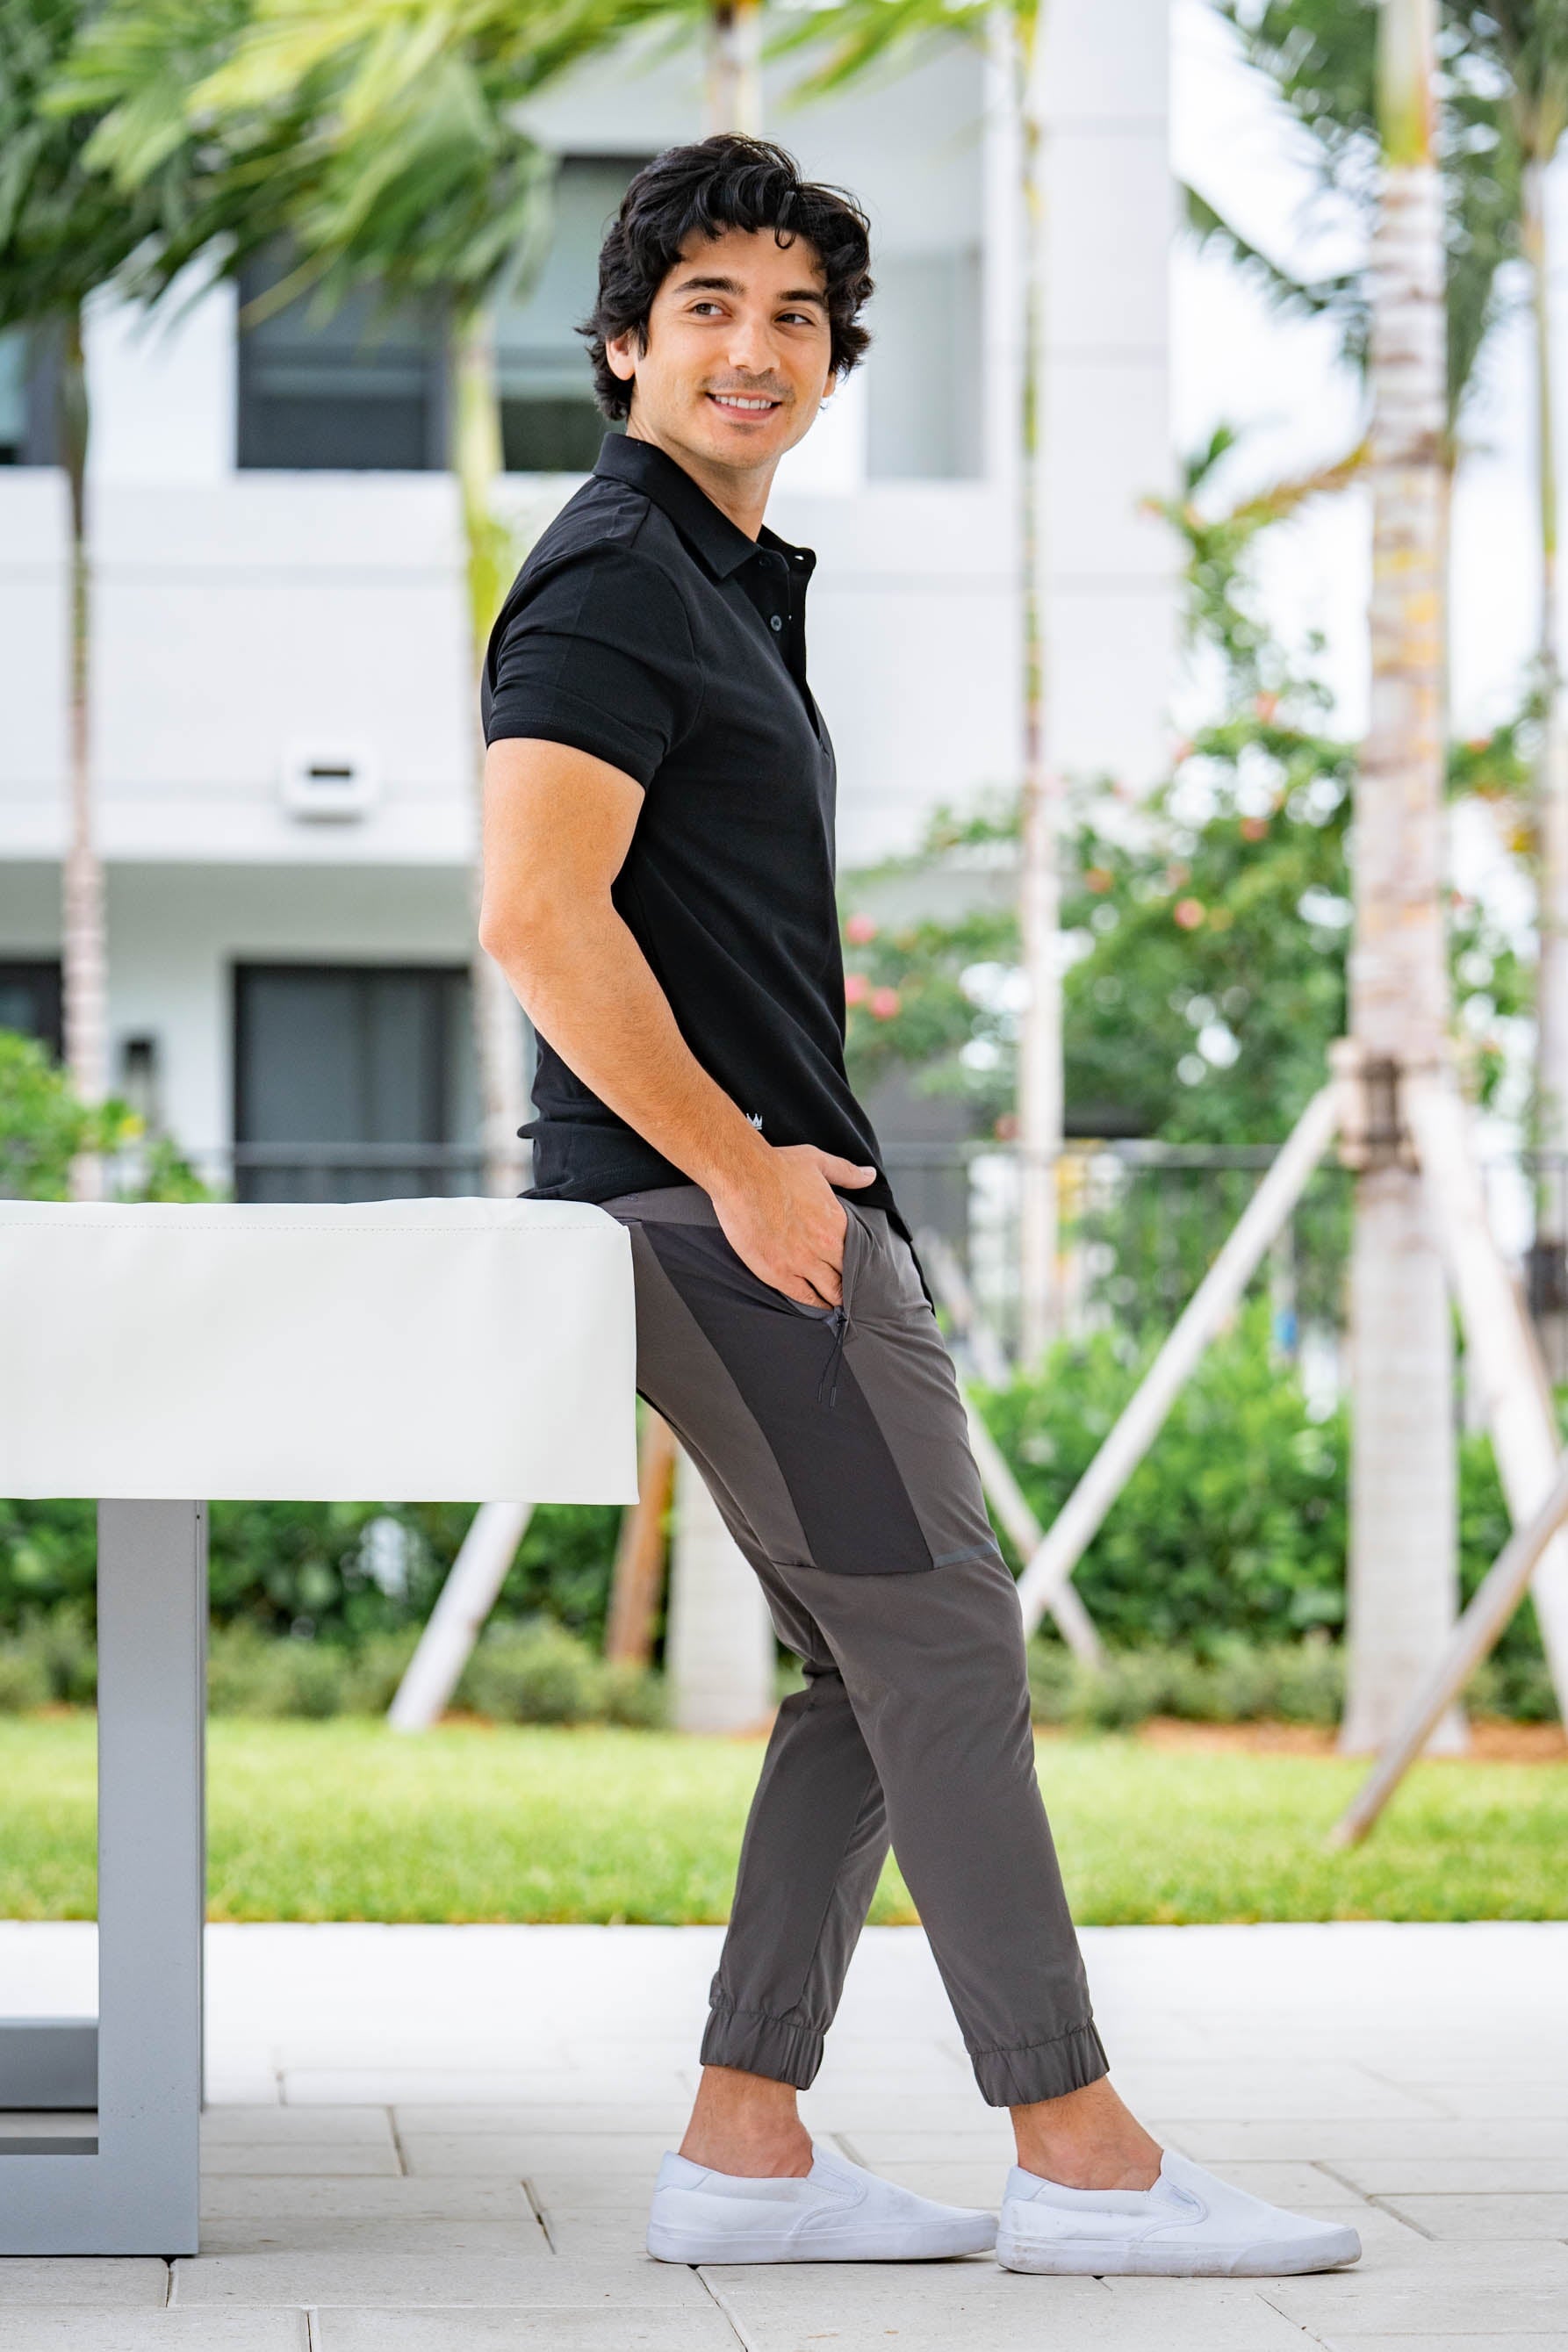 Man in a black polo shirt and gray joggers, standing outdoors with greenery in the background.